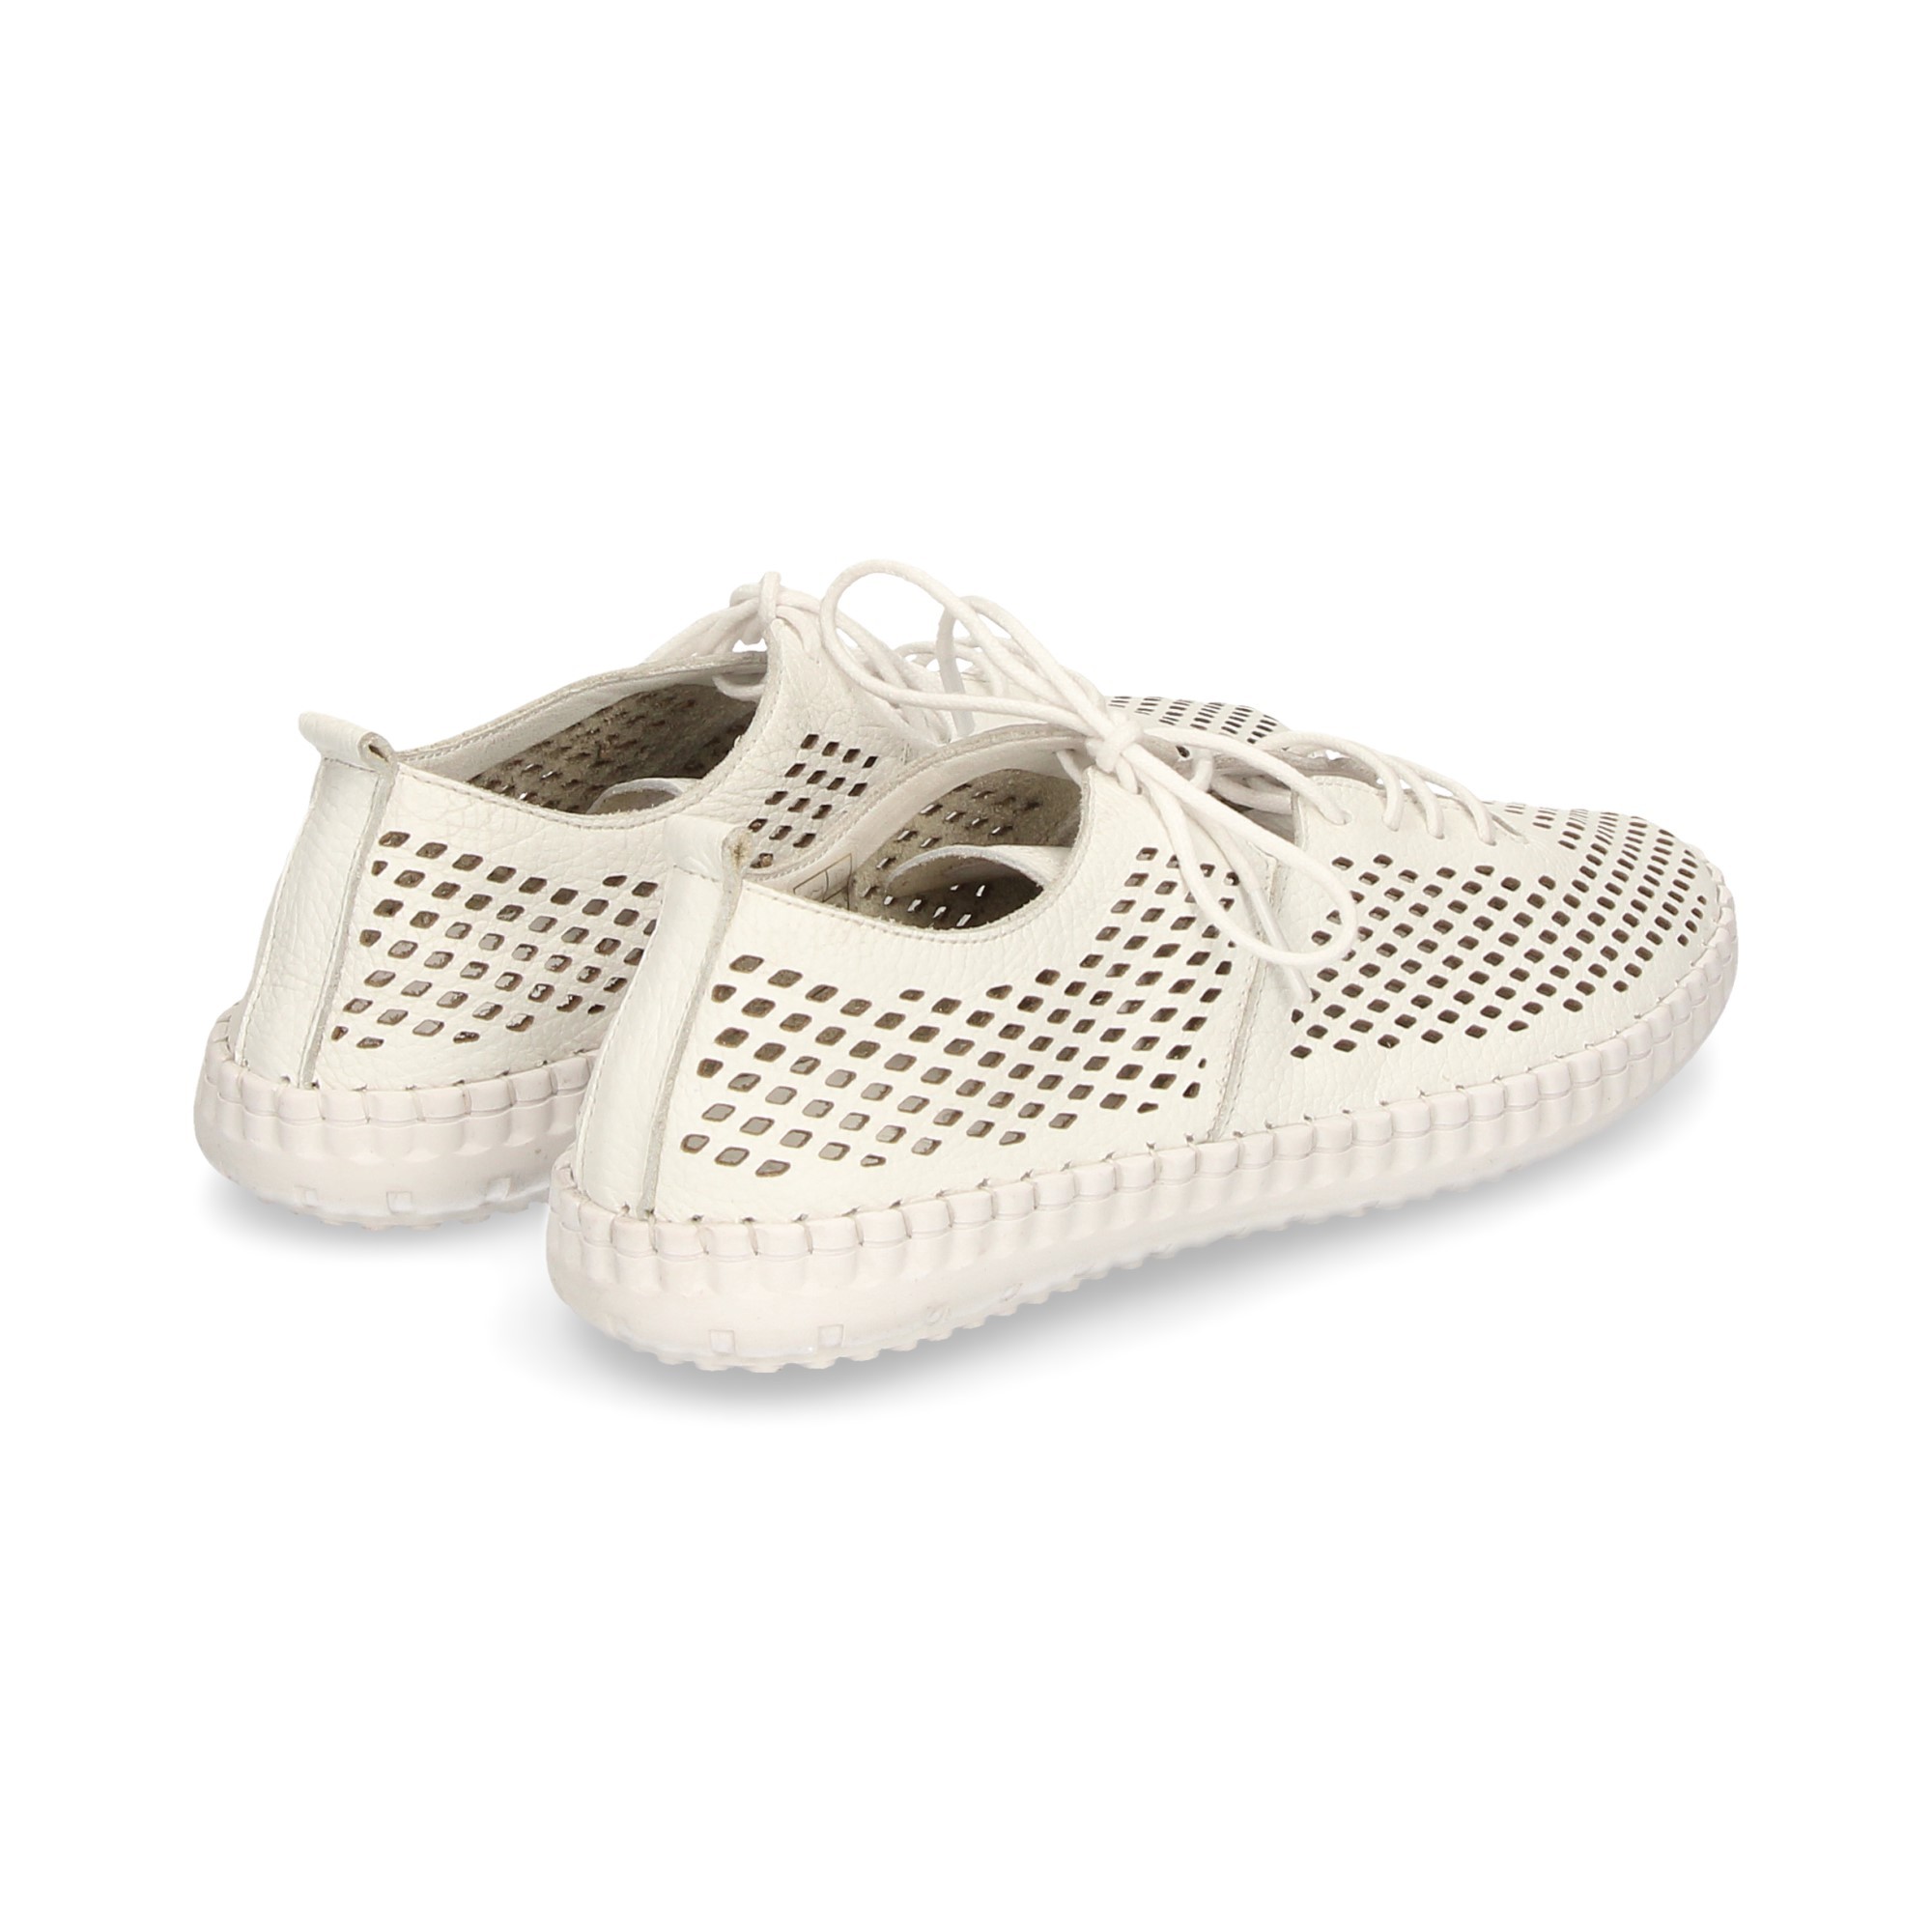 sporty-perforated-white-skin